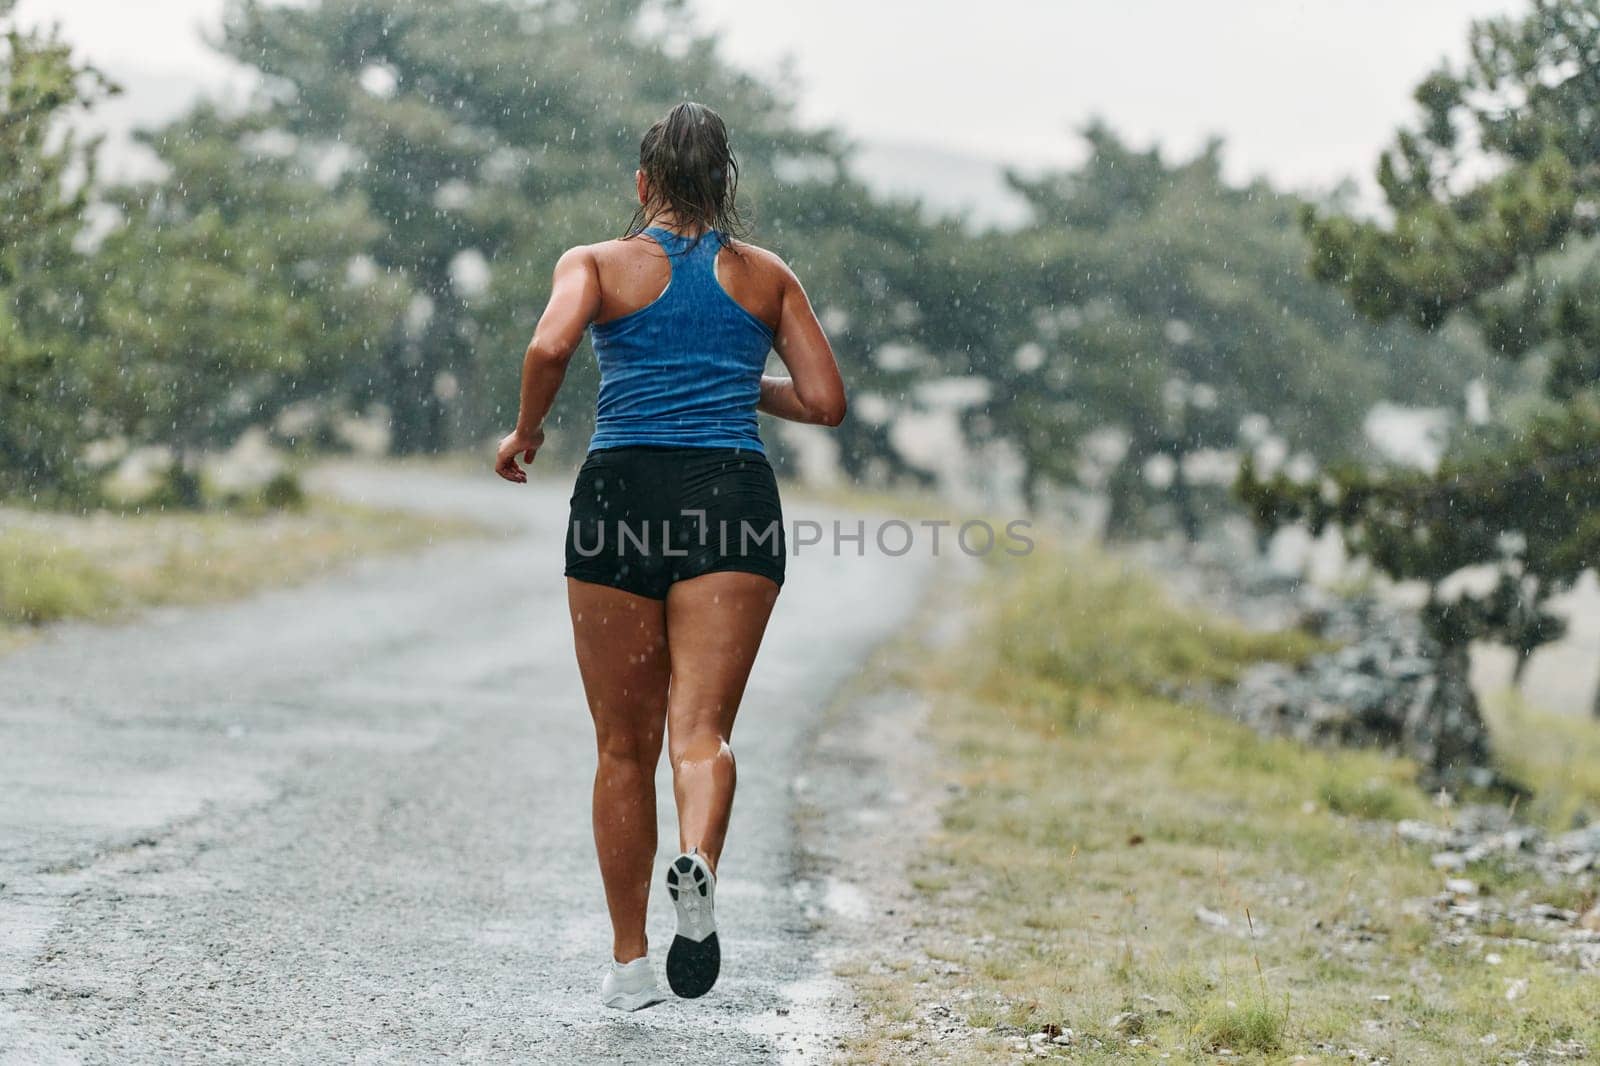 Unstoppable: A Determined Athlete Trains Through the Rain in Pursuit of Marathon Glory by dotshock